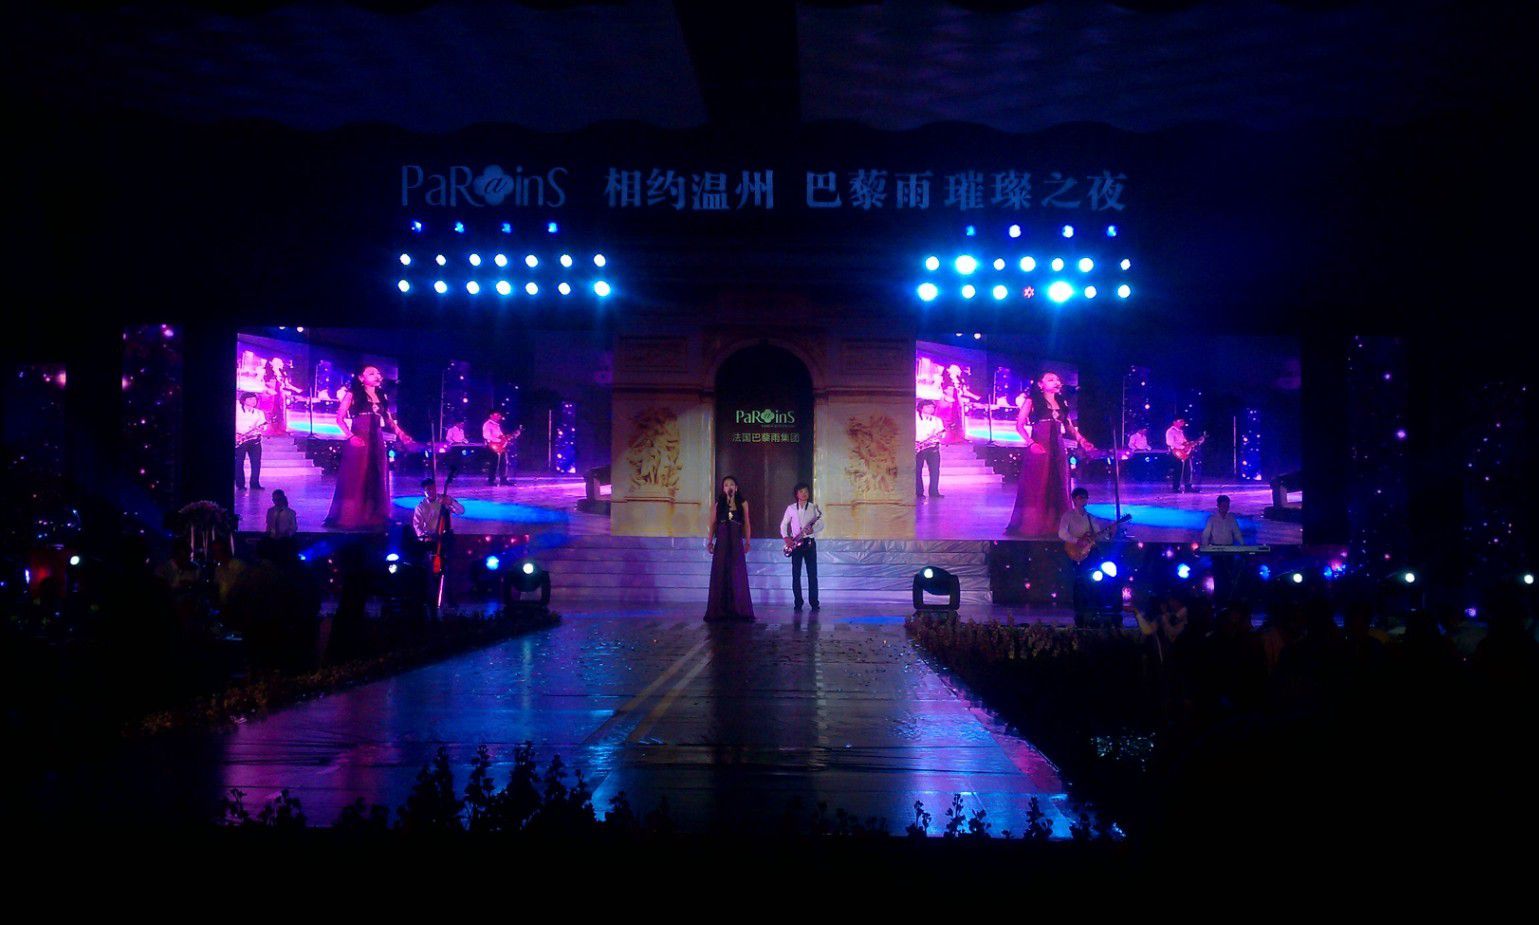 LED rental dance screen solutions, LED display success cases